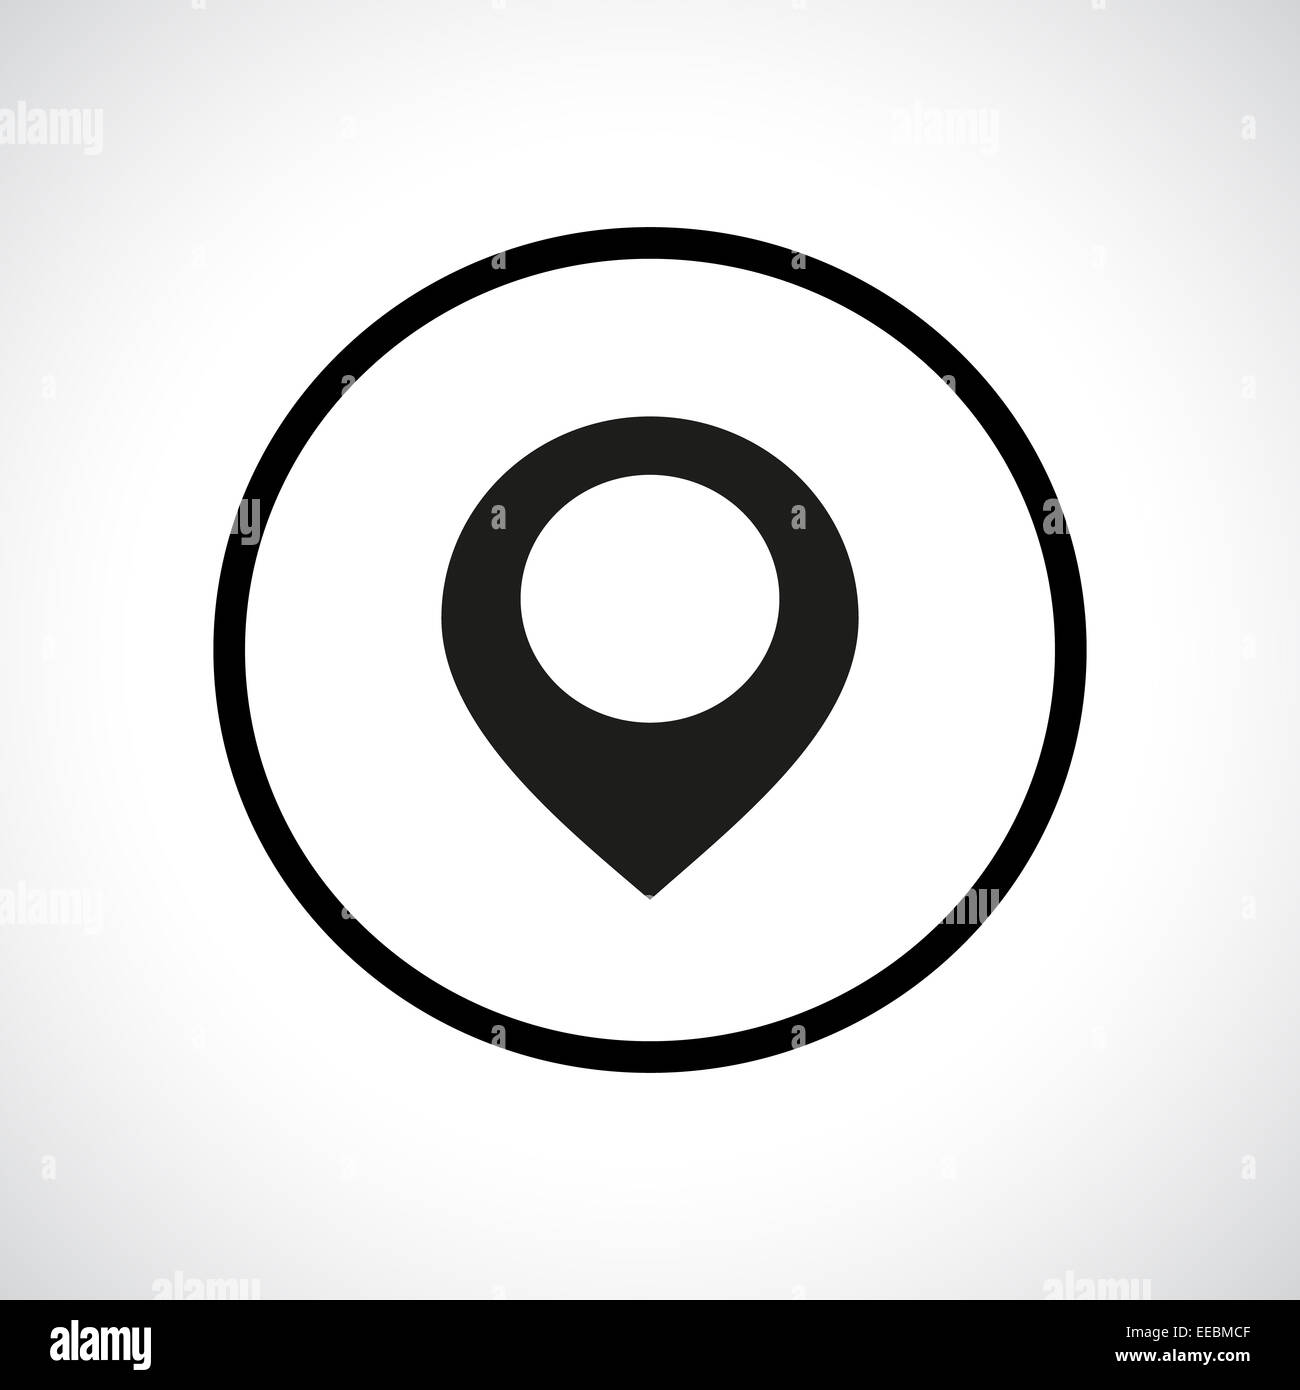 Map pointer icon in a circle Stock Photo - Alamy